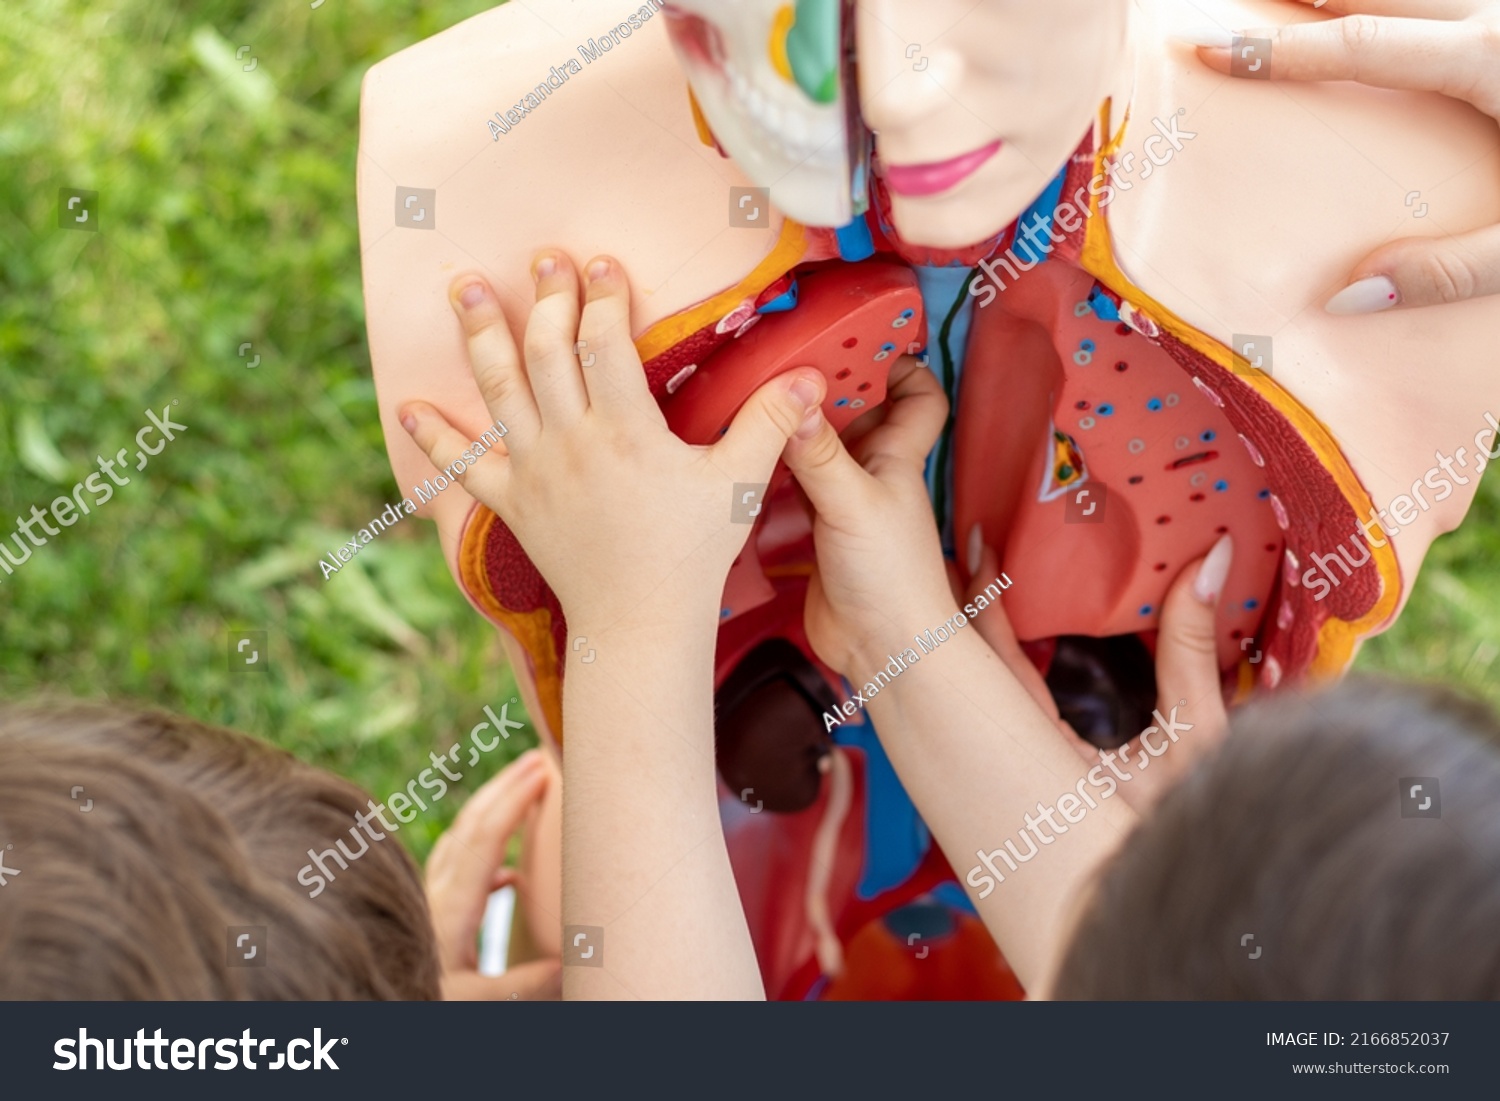 anatomy mannequin.plastic man dummy with internal organs.technical model of human body on green park nature background.kids hands putting organs inside the plastic body,useful activities,medicine #2166852037